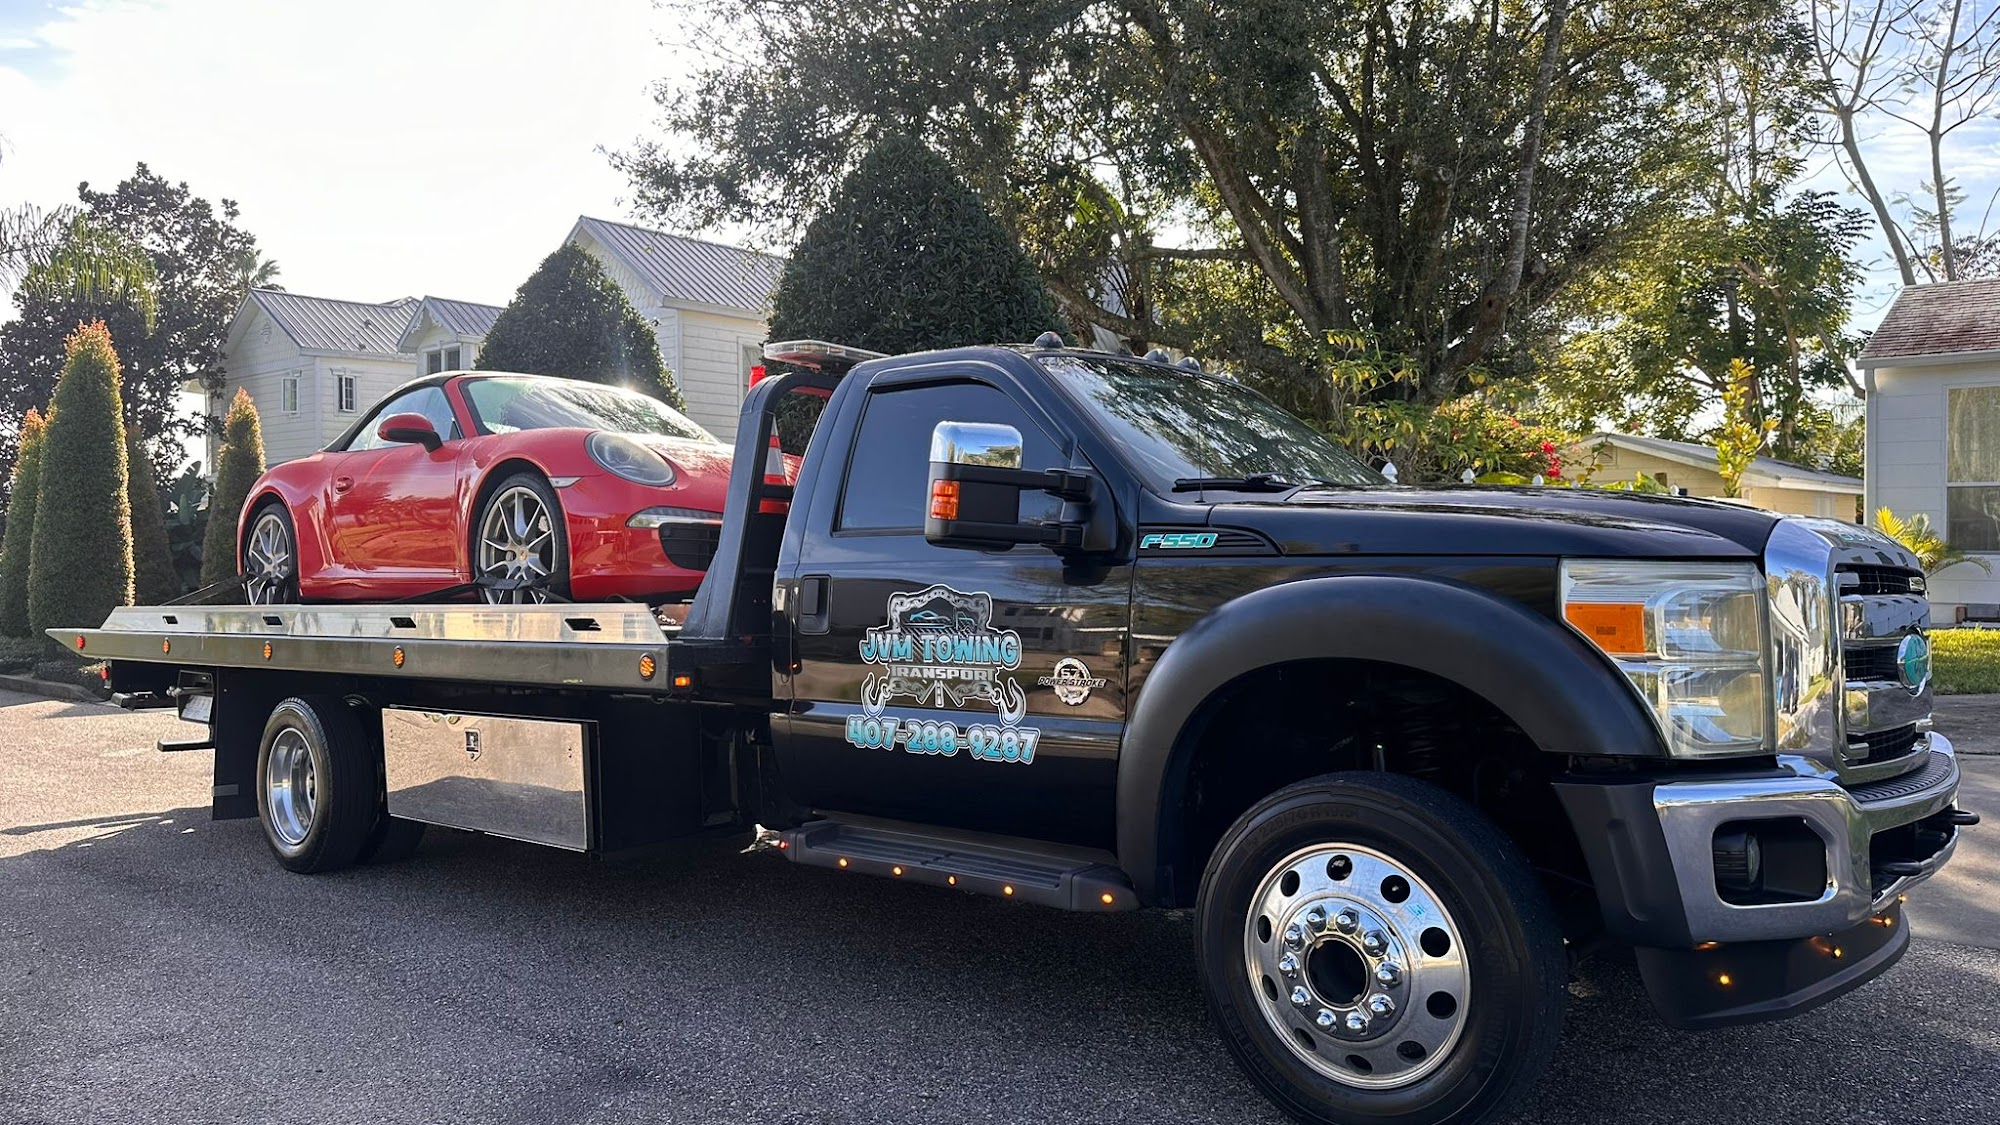 Jvm towing and transport